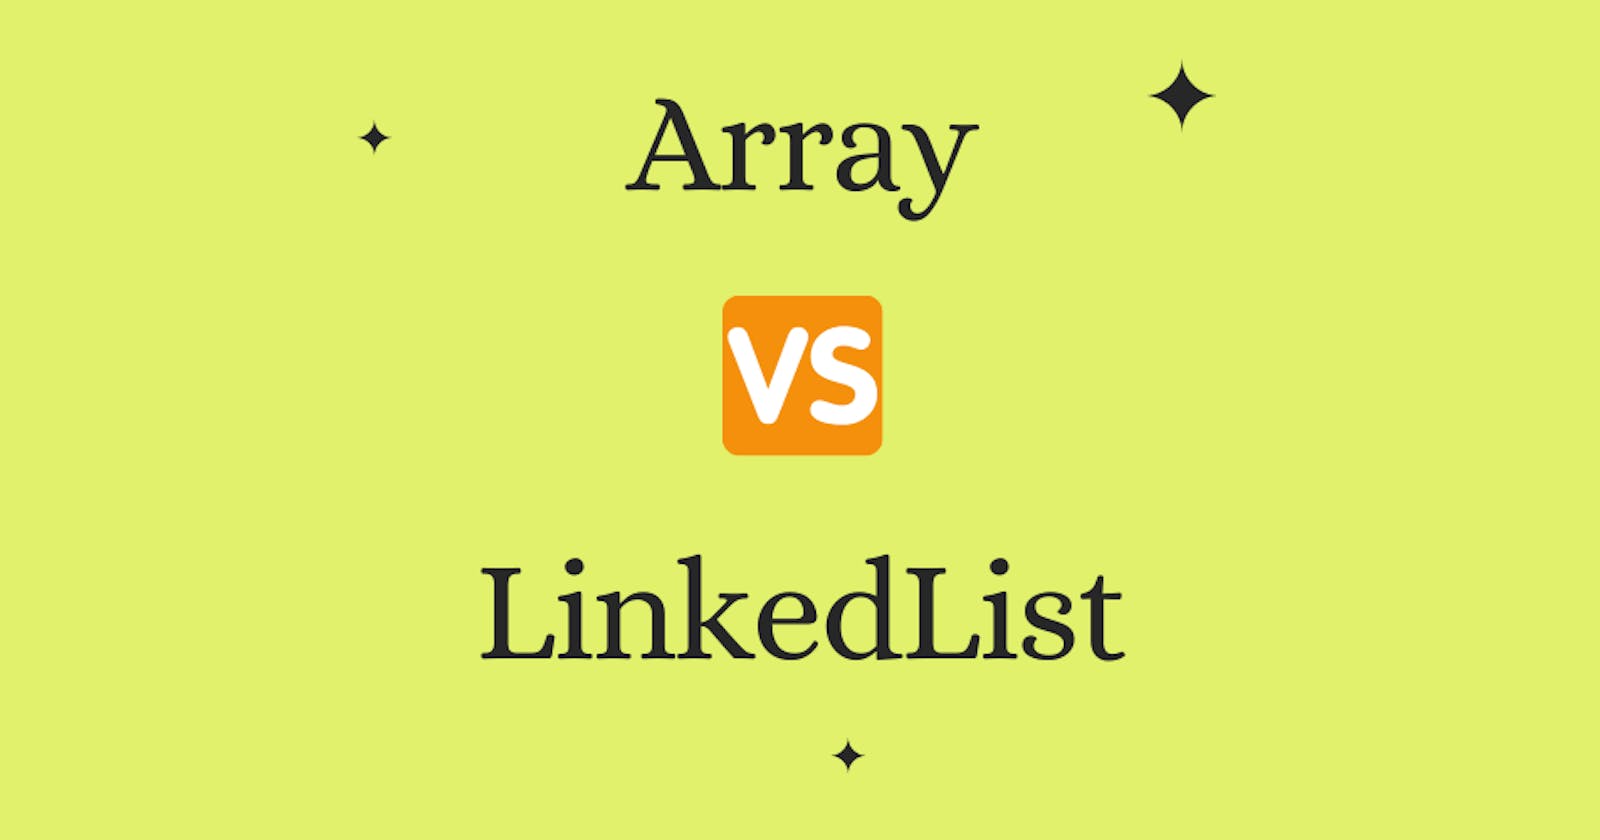 How can you differentiate between Array and LinkedList?